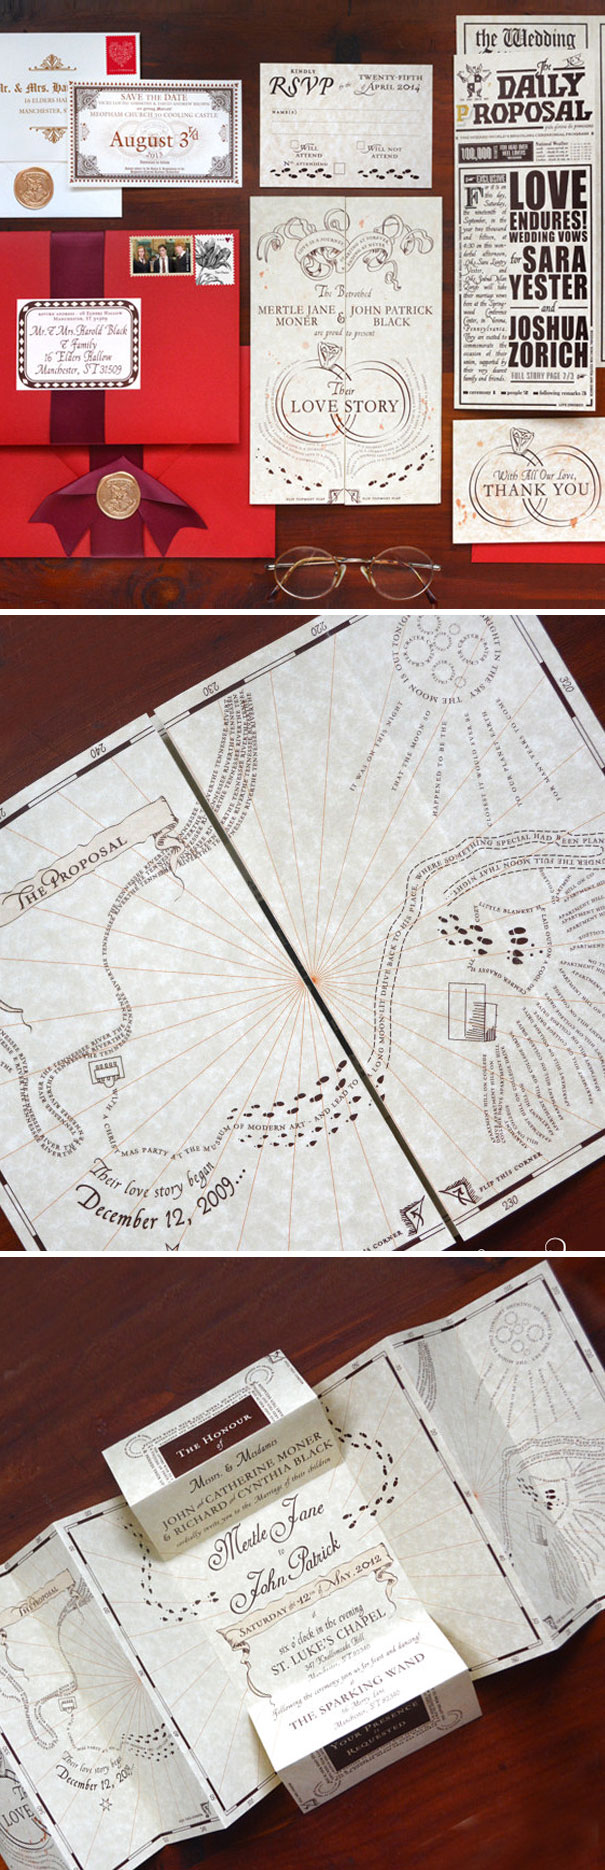 Wedding Invitations As The Marauder's Map From Harry Potter